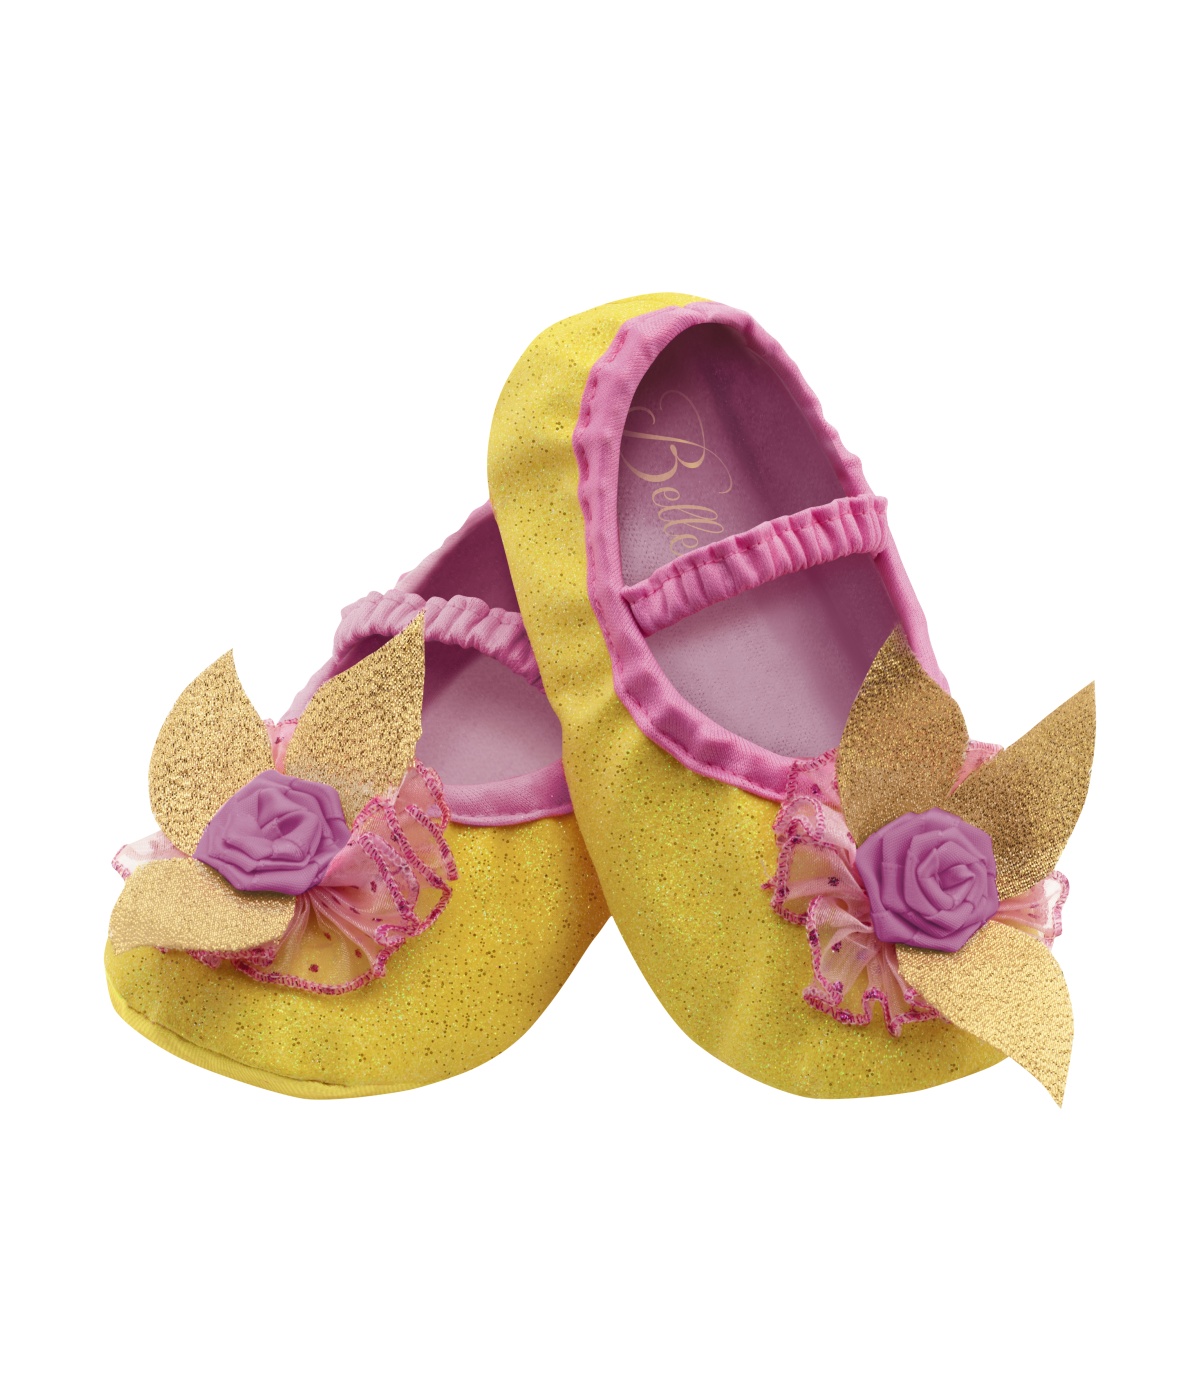  Princess Belle Baby Slippers